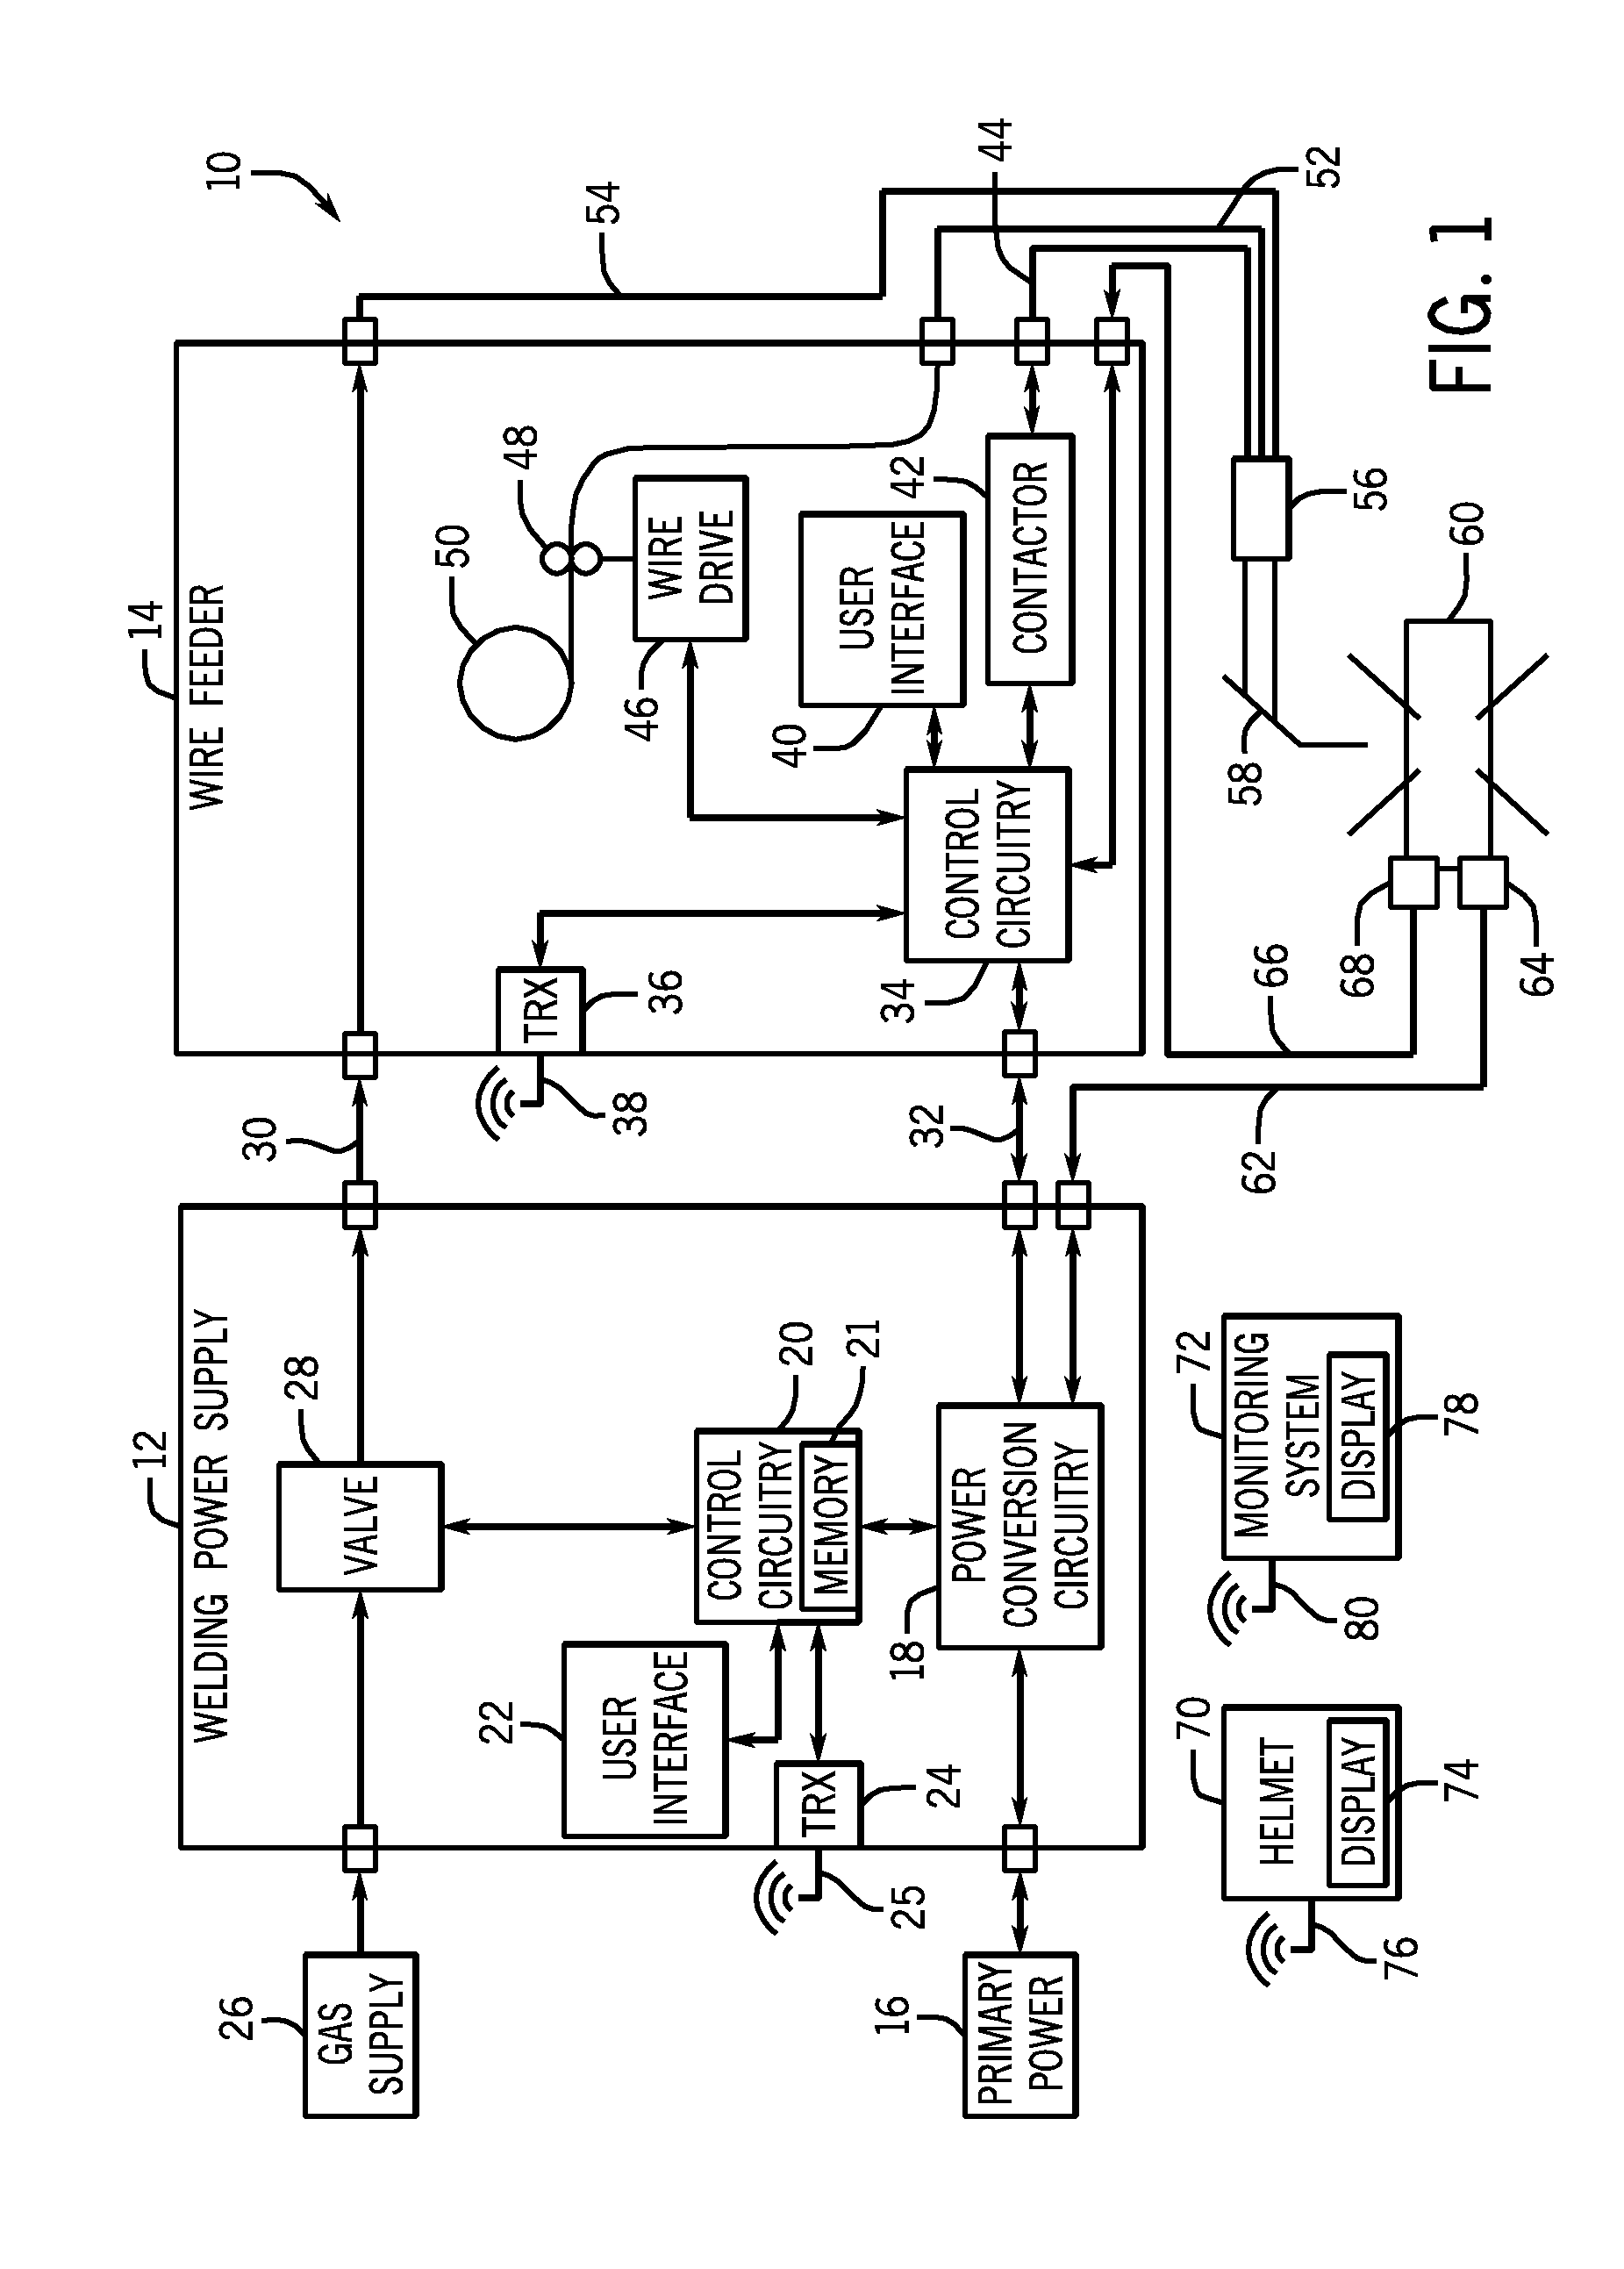 Devices and methods for analyzing spatter generating events